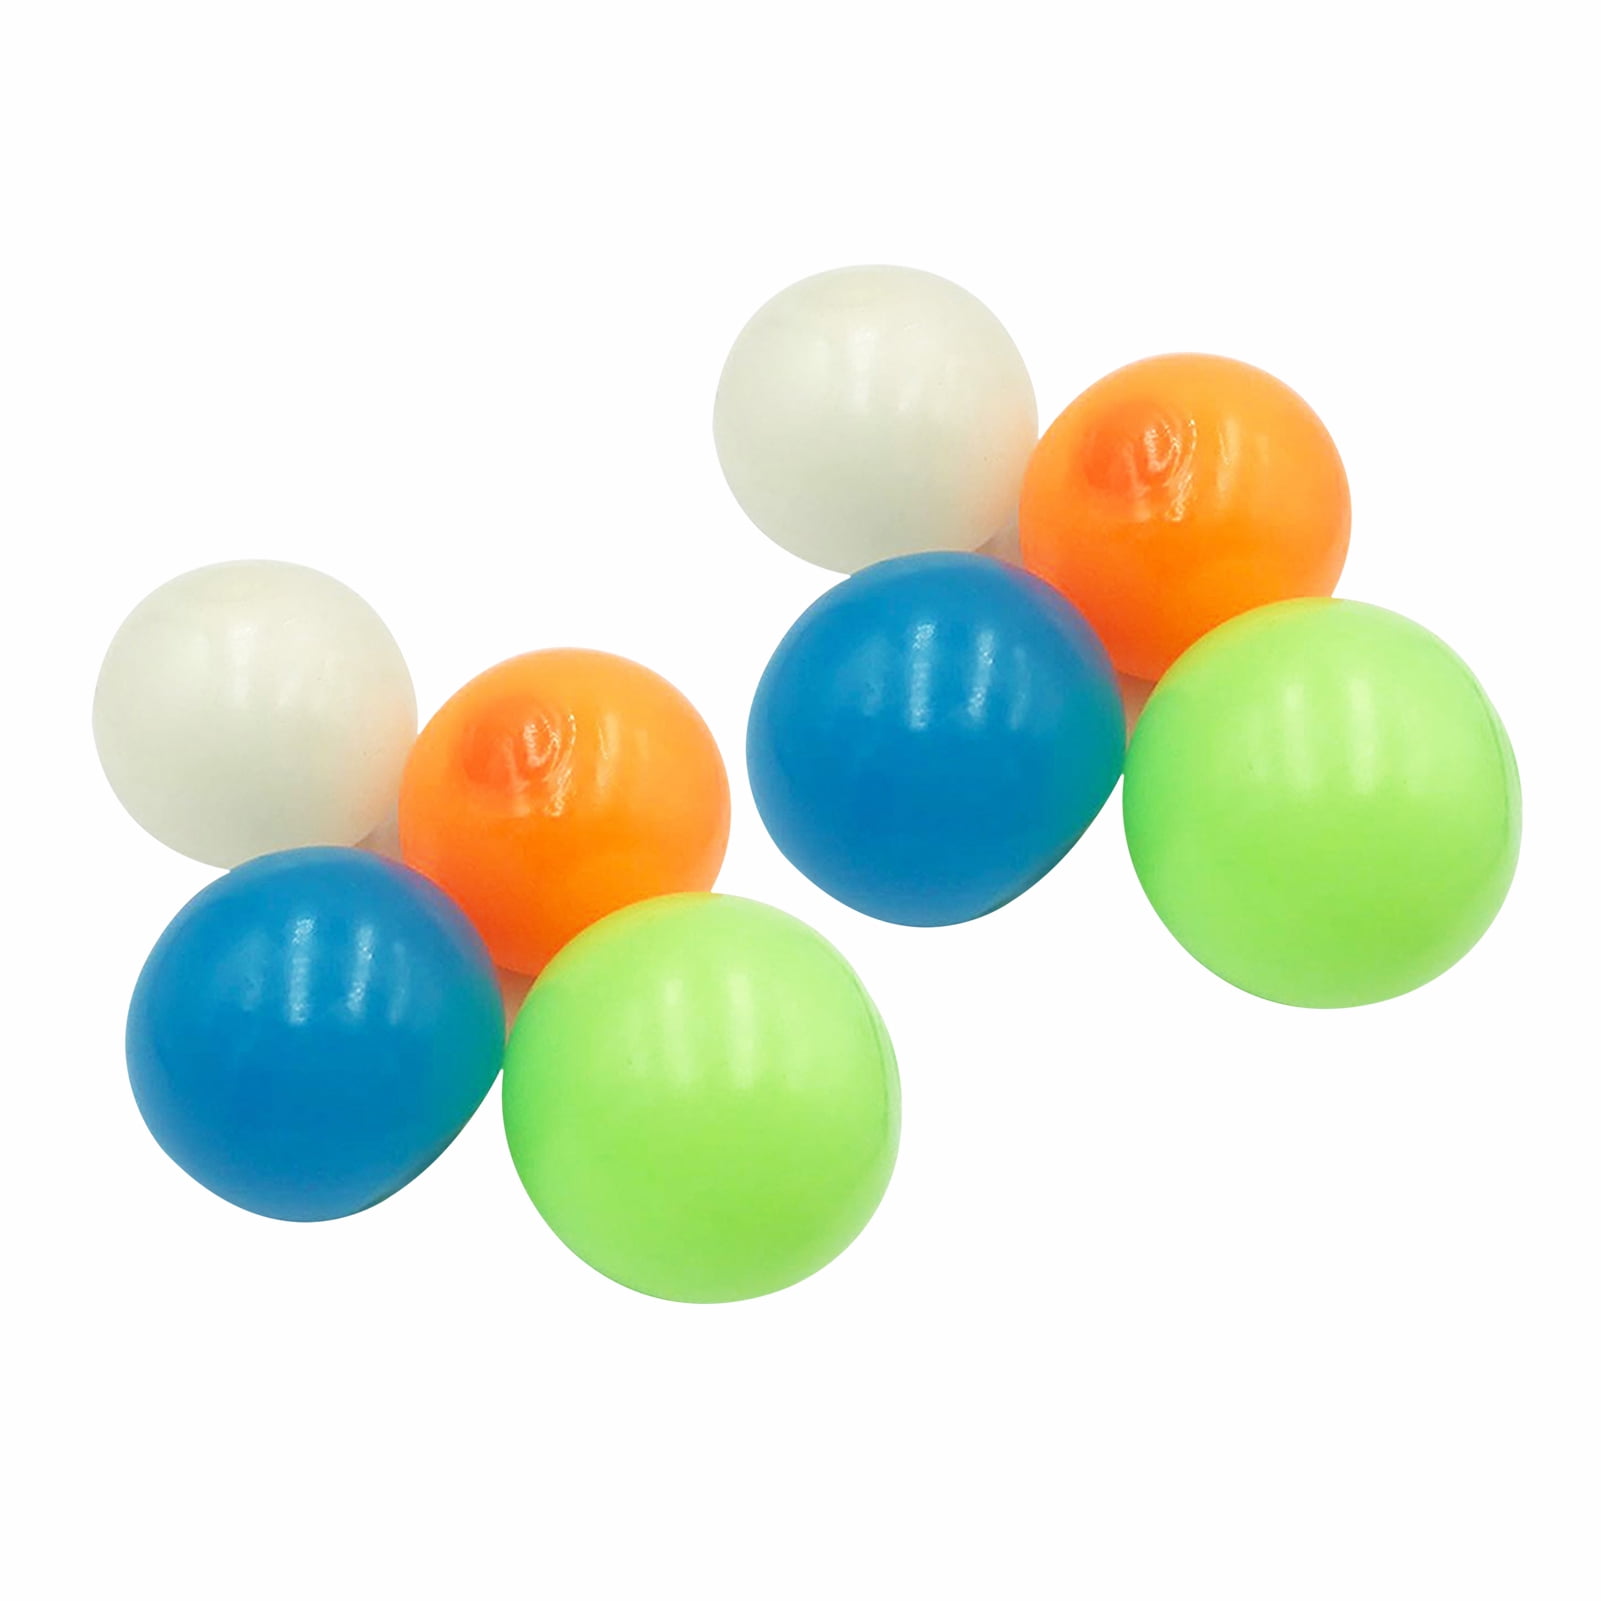 Details about   8PCS Sticky Balls Sticky Balls for Ceiling Stress Relief Globbles Stress Kid Toy 